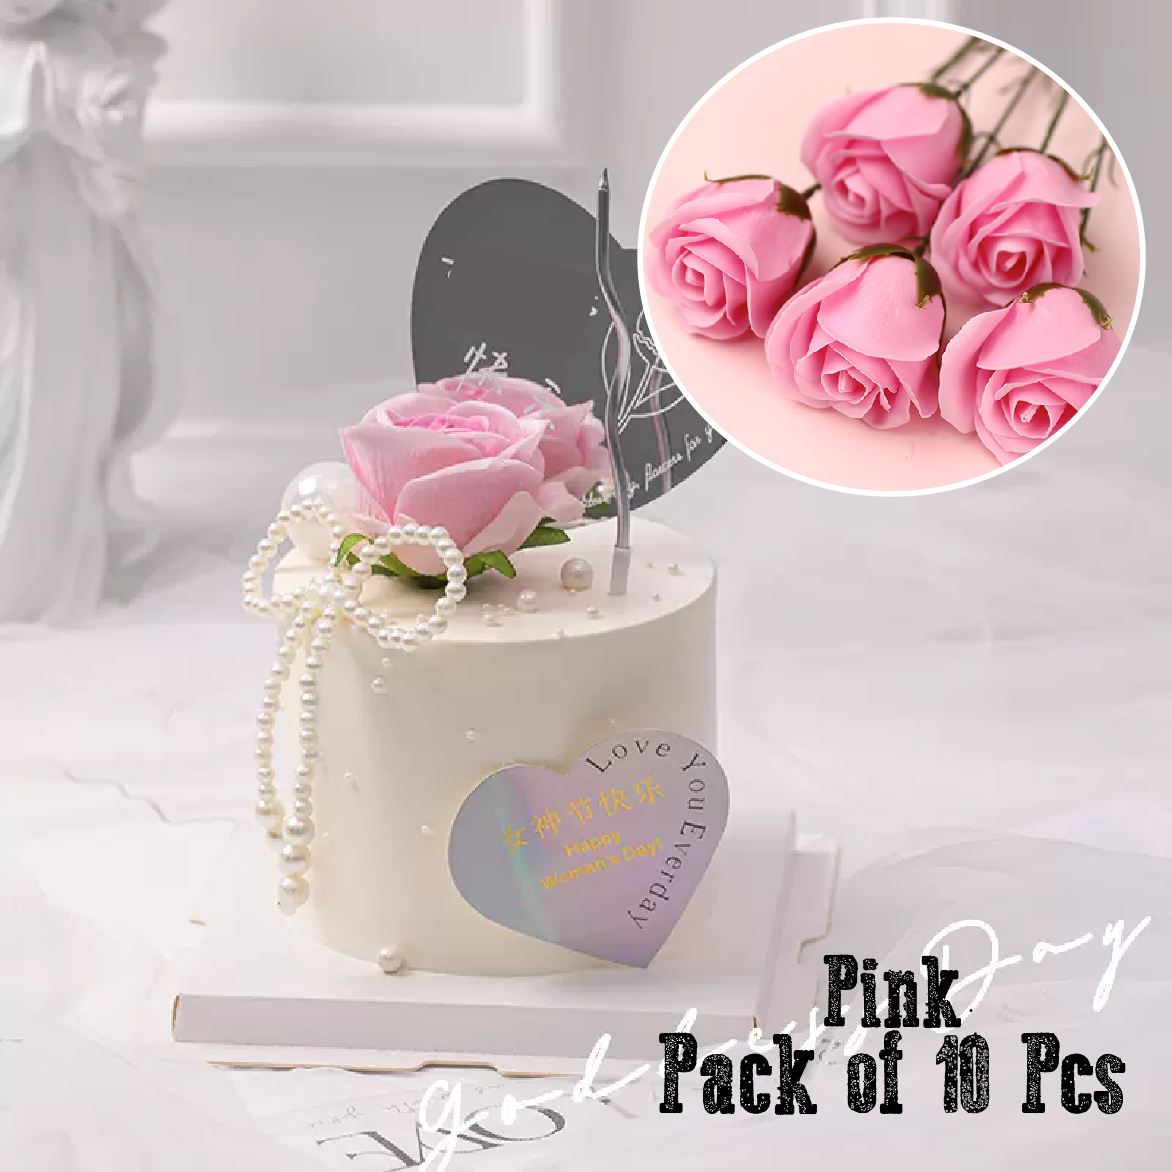 Cake Decoration Flowers - Imitation Roses, pink - pack of 10 - Rampant Coffee Company